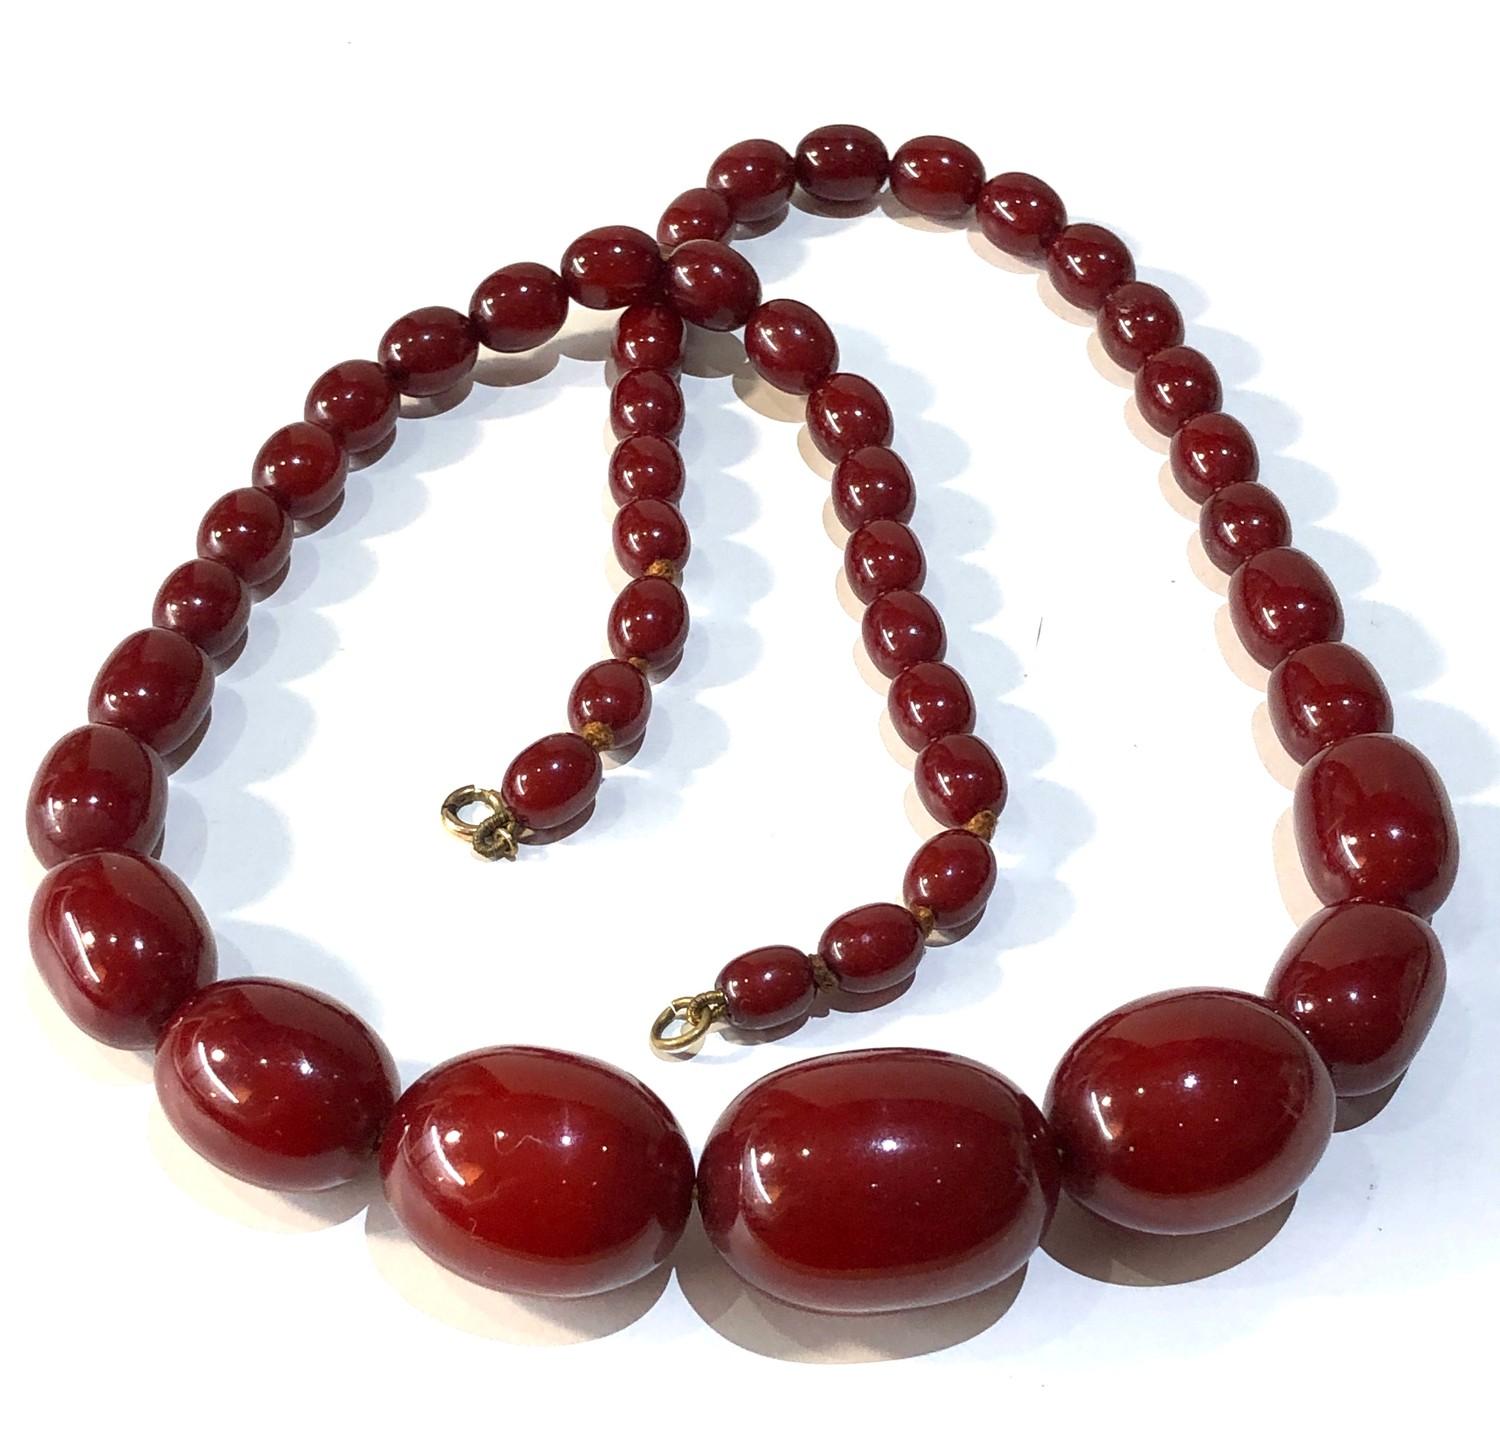 Antique cherry amber / bakelite bead necklace largest bead measures approx 3.2cm by 2.3cm weight 71g - Image 2 of 4